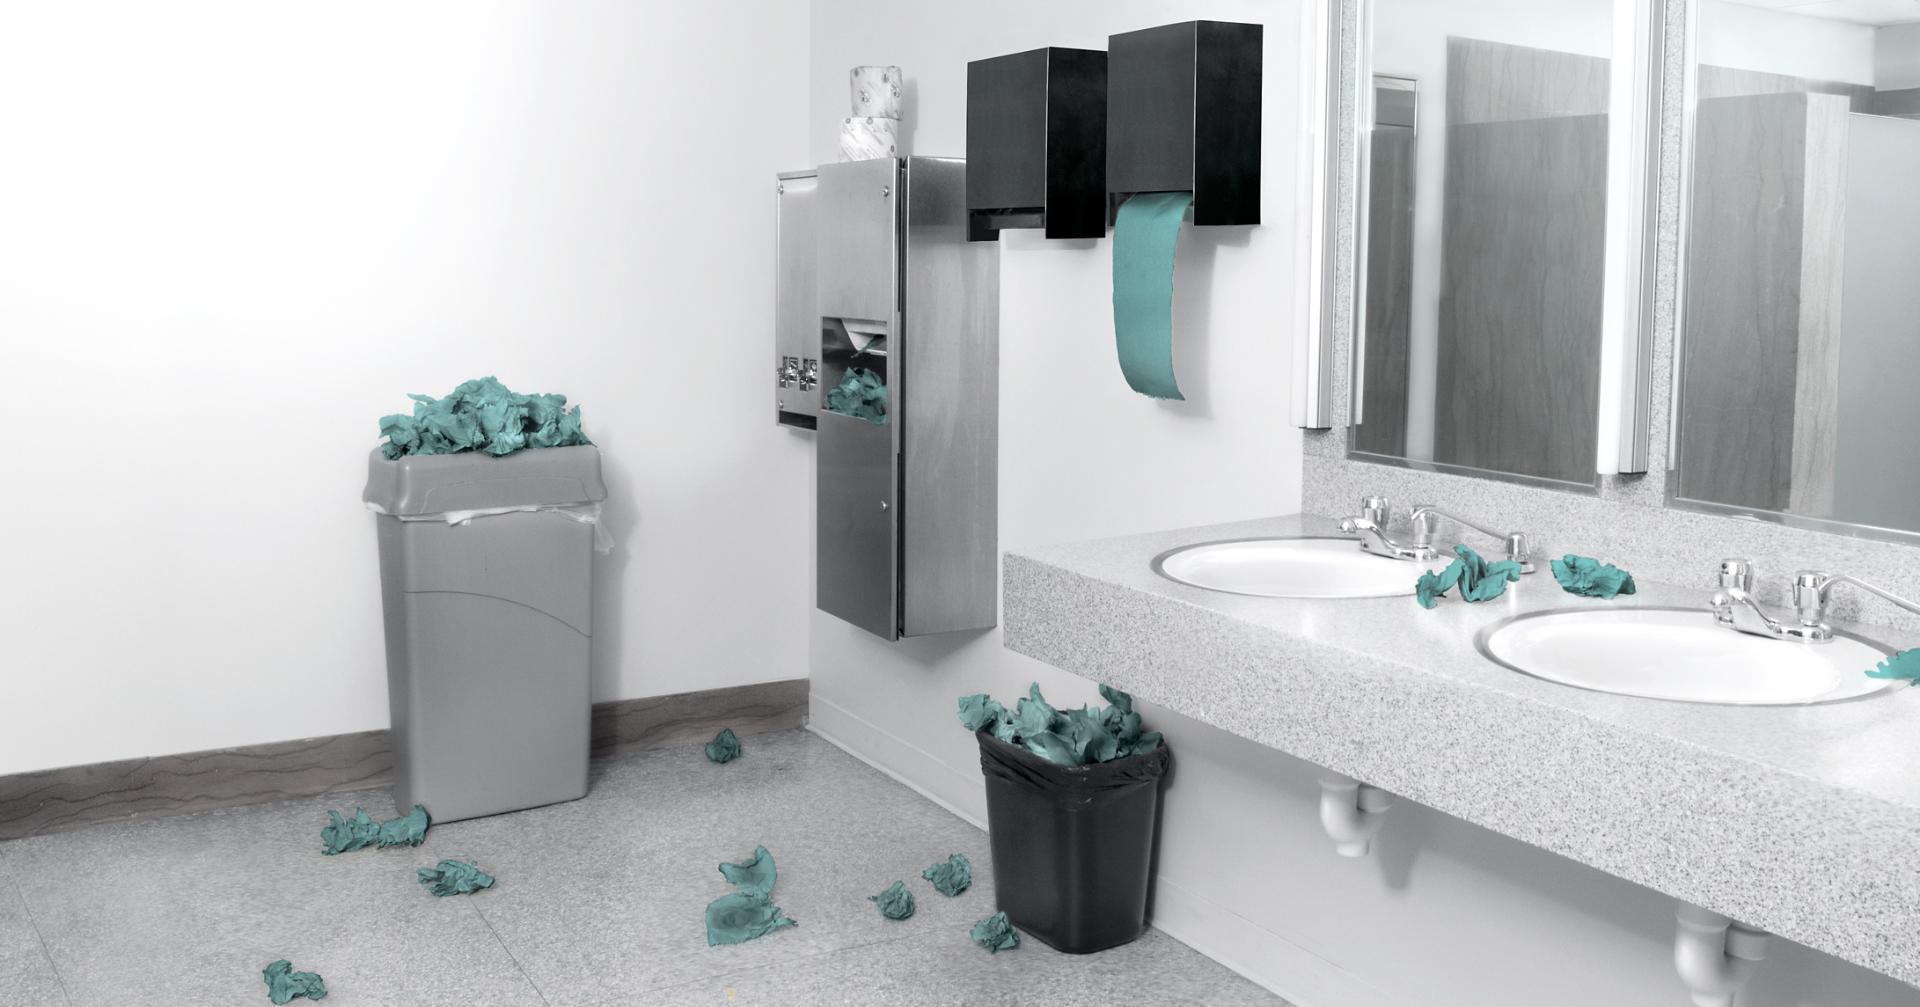 Washroom with paper towels on the floor and in overflowing bins